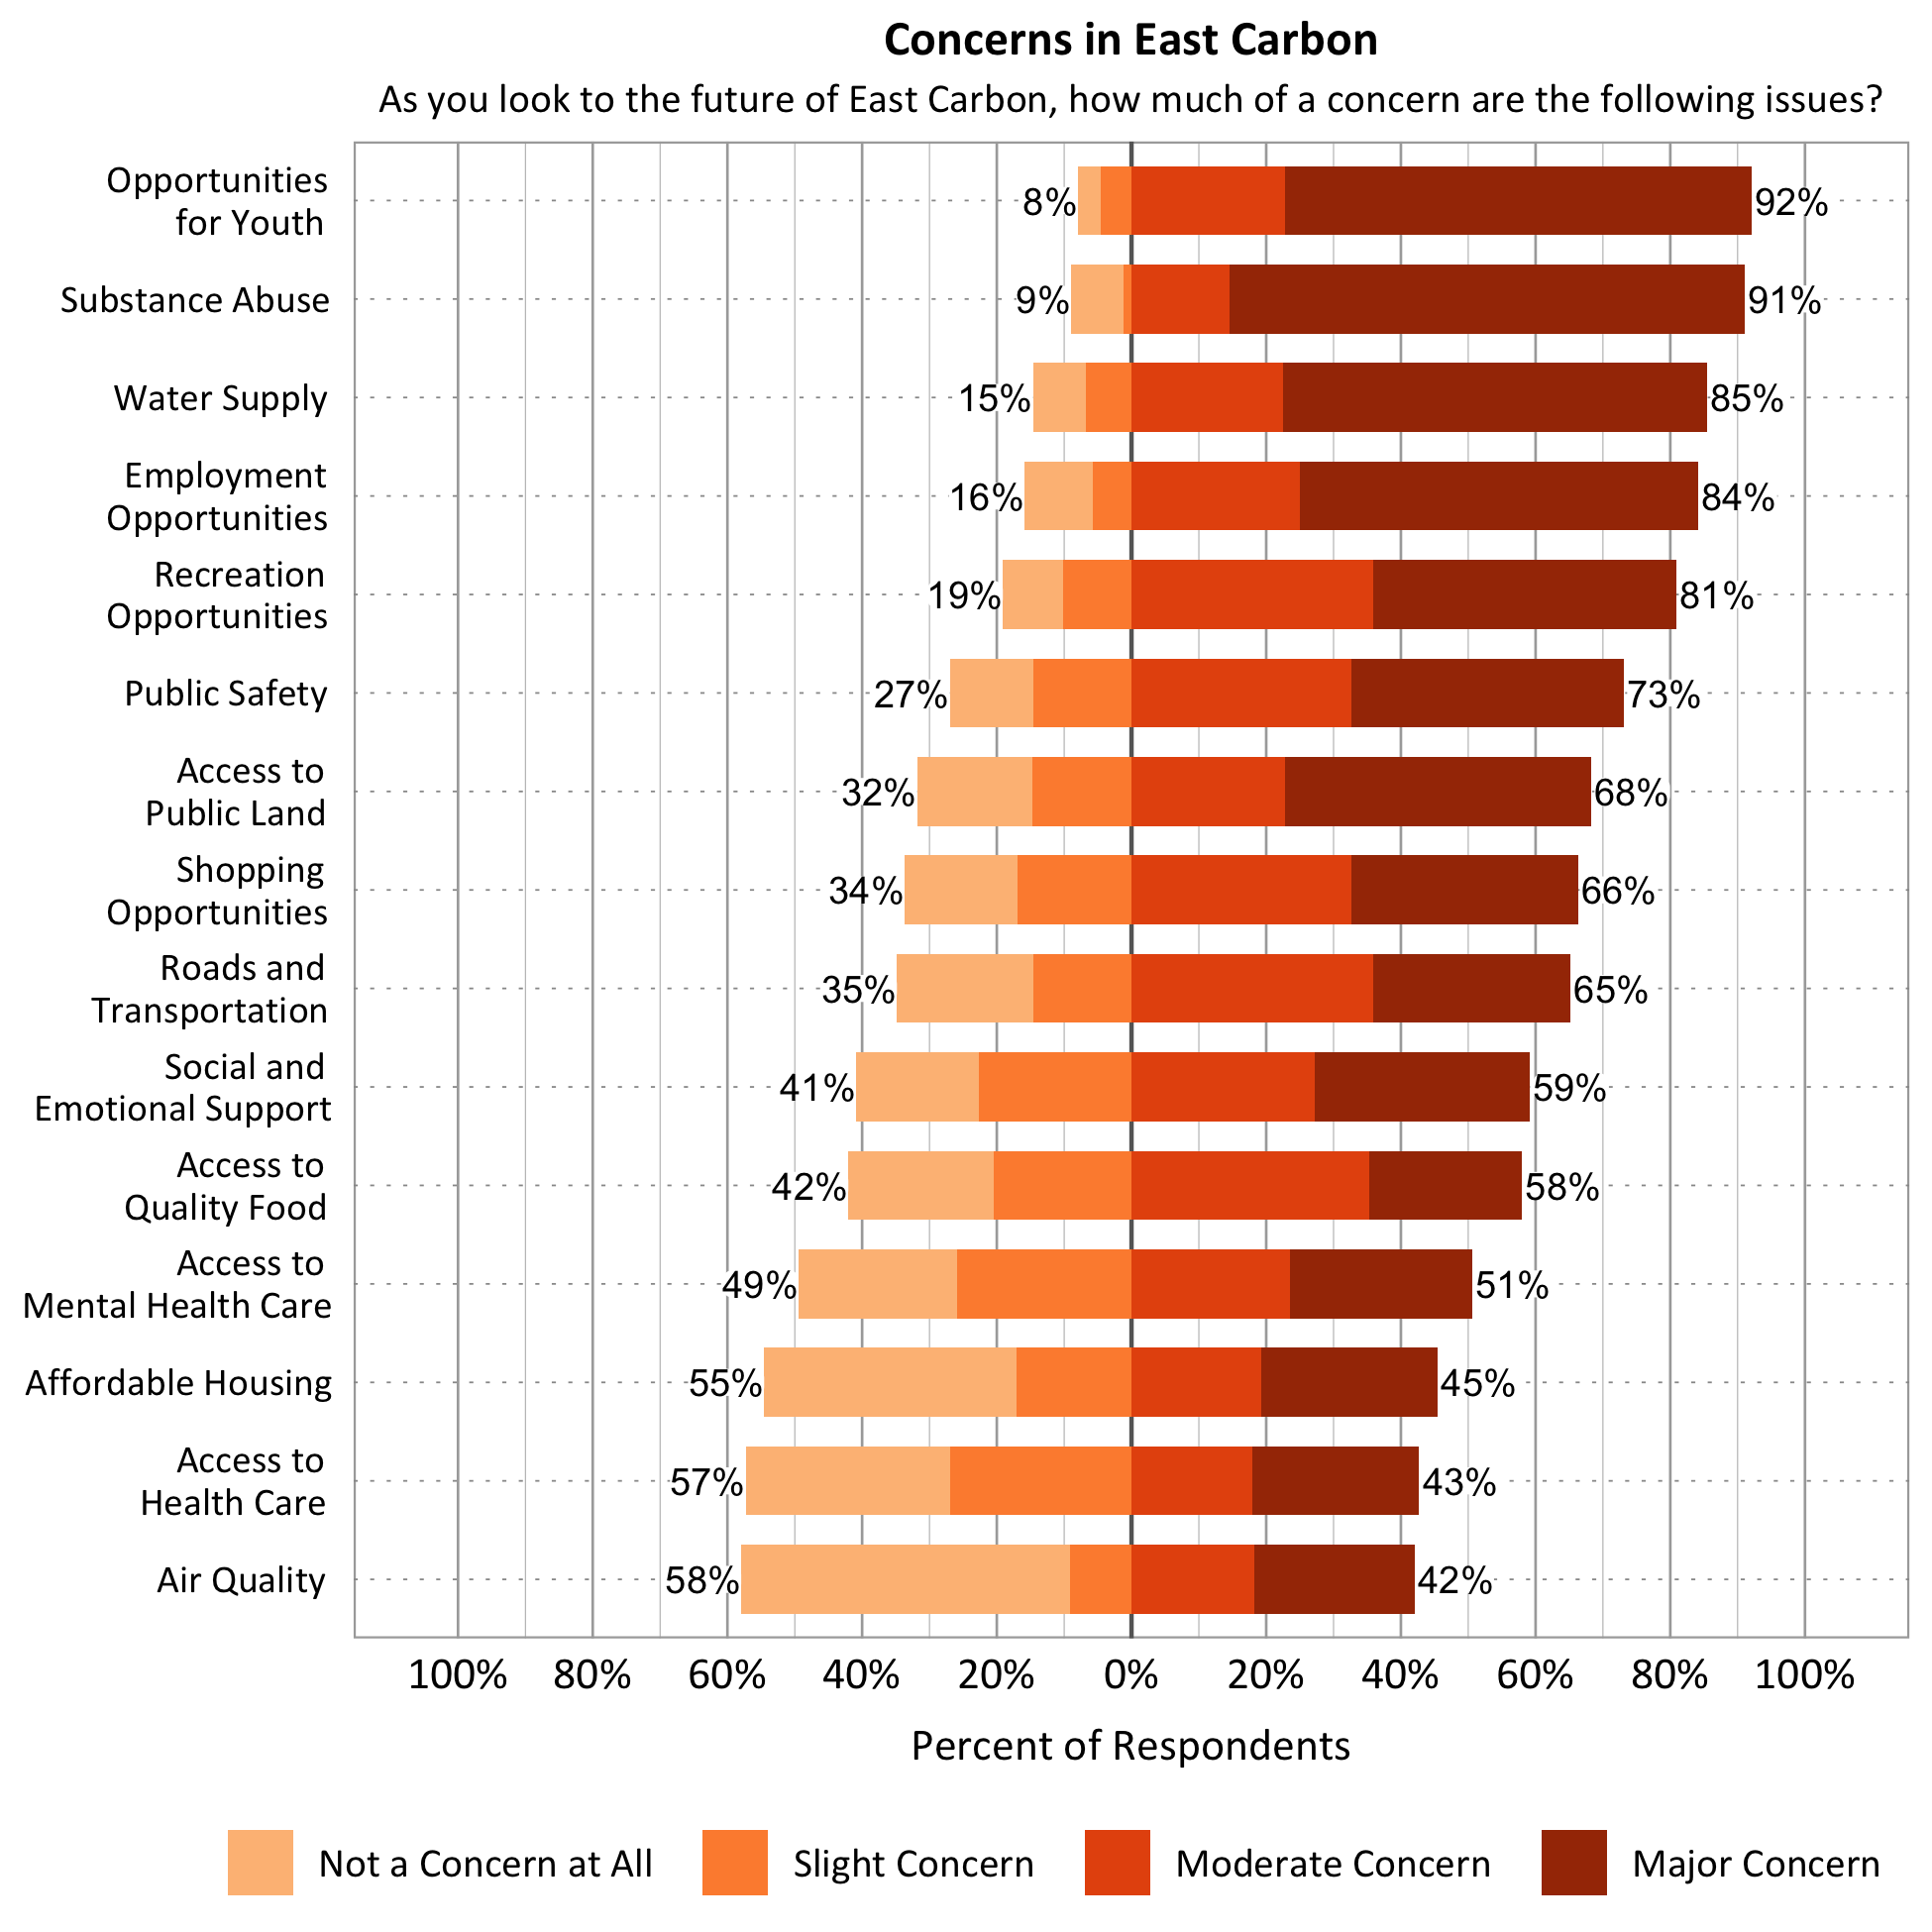 Title: Concerns in East Carbon. Subtitle: As you look to the future of East Carbon, how much of a concern are the following issues? Data – Category: Air Quality- 58% of respondents indicated not a concern at all or slight concern while 42% of respondents indicated a moderate or major concern; ; Category: Affordable Housing- 55% of respondents indicated not a concern at all or slight concern while 45% of respondents indicated a moderate or major concern; Category: Water Supply- 15% of respondents indicated not a concern at all or slight concern while 85% of respondents indicated a moderate or major concern; ; Category: Roads and Transportation- 35% of respondents indicated not a concern at all or slight concern while 65% of respondents indicated a moderate or major concern; Category: Recreation Opportunities- 19% of respondents indicated not a concern at all or slight concern while 81% of respondents indicated a moderate or major concern; Category: Access to Public Land- 32% of respondents indicated not a concern at all or slight concern while 68% of respondents indicated a moderate or major concern; Category: Public Safety- 27% of respondents indicated not a concern at all or slight concern while 68% of respondents indicated a moderate or major concern; Category: Opportunities for Youth- 8% of respondents indicated not a concern at all or slight concern while 92% of respondents indicated a moderate or major concern; Category: Access to Mental Health Care- 49% of respondents indicated not a concern at all or slight concern while 51% of respondents indicated a moderate or major concern; Category: Employment Opportunities- 16% of respondents indicated not a concern at all or slight concern while 91% of respondents indicated a moderate or major concern; Category: Access to Quality Food- 52% of respondents indicated not a concern at all or slight concern while 58% of respondents indicated a moderate or major concern; Category: Access to Healthcare- 57% of respondents indicated not a concern at all or slight concern while 43% of respondents indicated a moderate or major concern; Category: Social and Emotional Support- 41% of respondents indicated not a concern at all or slight concern while 59% of respondents indicated a moderate or major concern; Category: Substance Abuse - 9% of respondents indicated not a concern at all or slight concern while 91% of respondents indicated a moderate or major concern; Category: Shopping Opportunities- 34% of respondents indicated not a concern at all or slight concern while 56% of respondents indicated a moderate or major concern. 